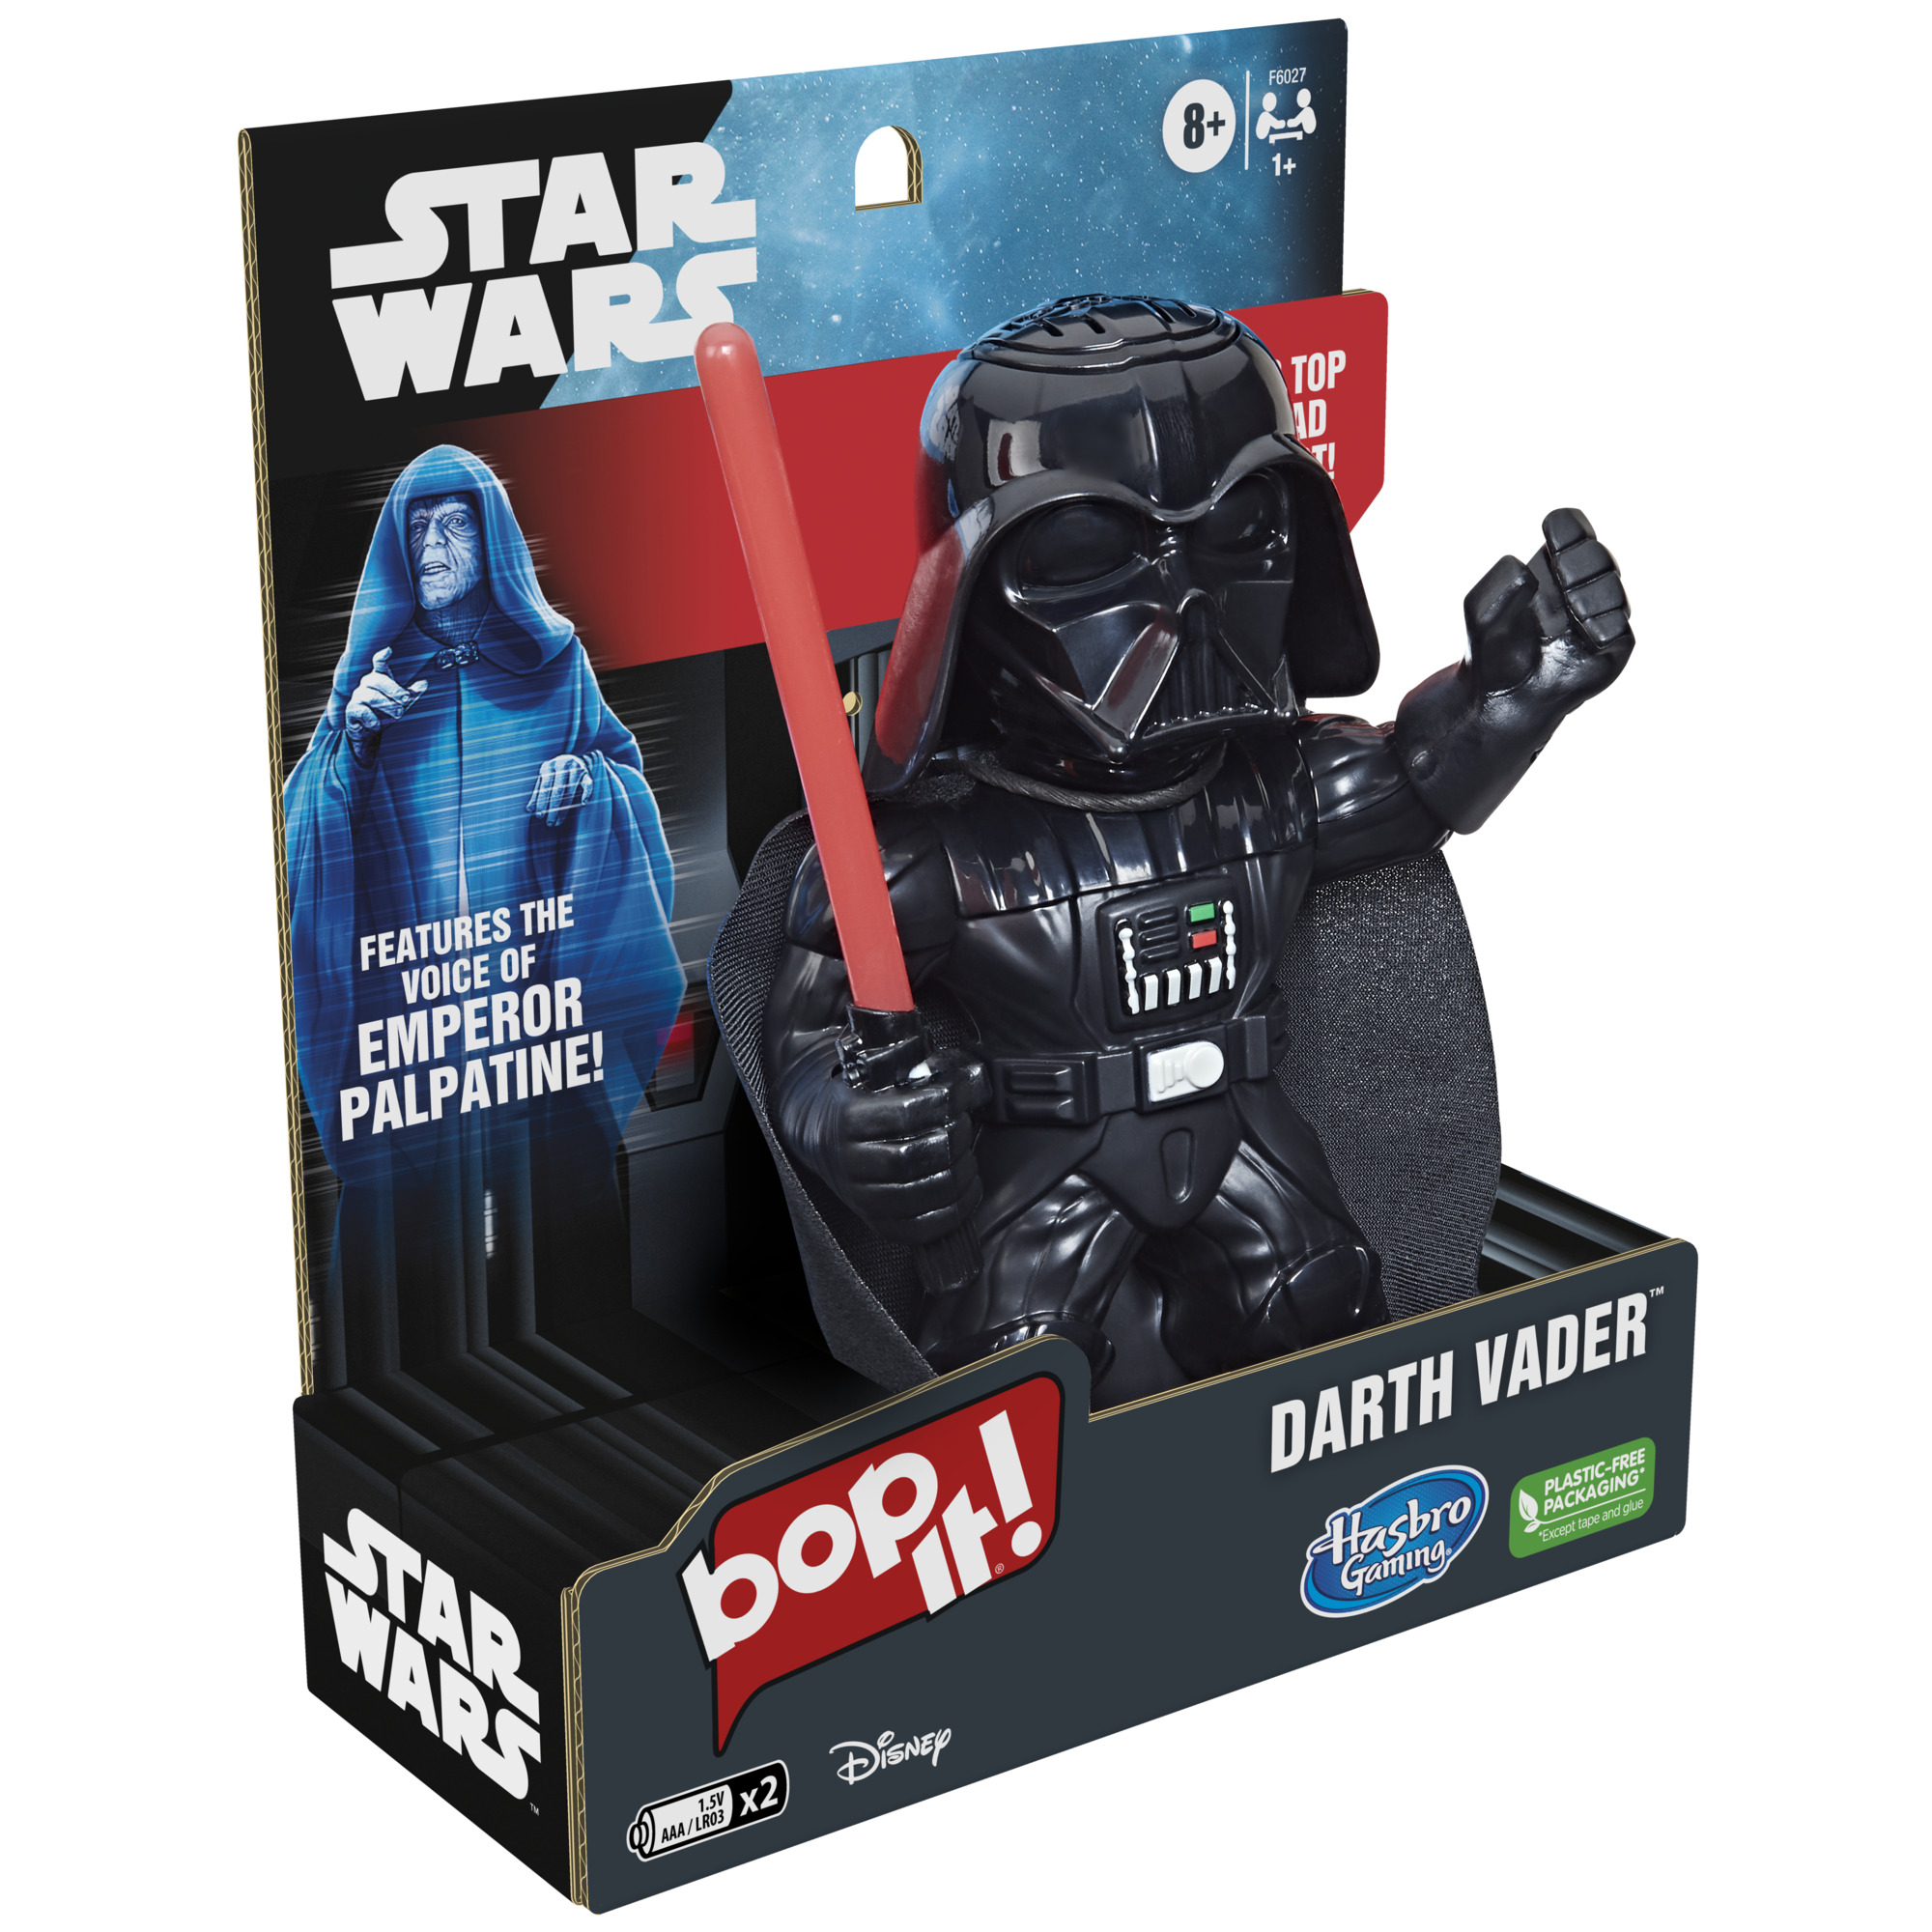 Bop It! Star Wars Darth Vader Edition Game, Features the Voice of Emperor Palpatine, Ages 8 and Up, Only At Walmart - image 4 of 5